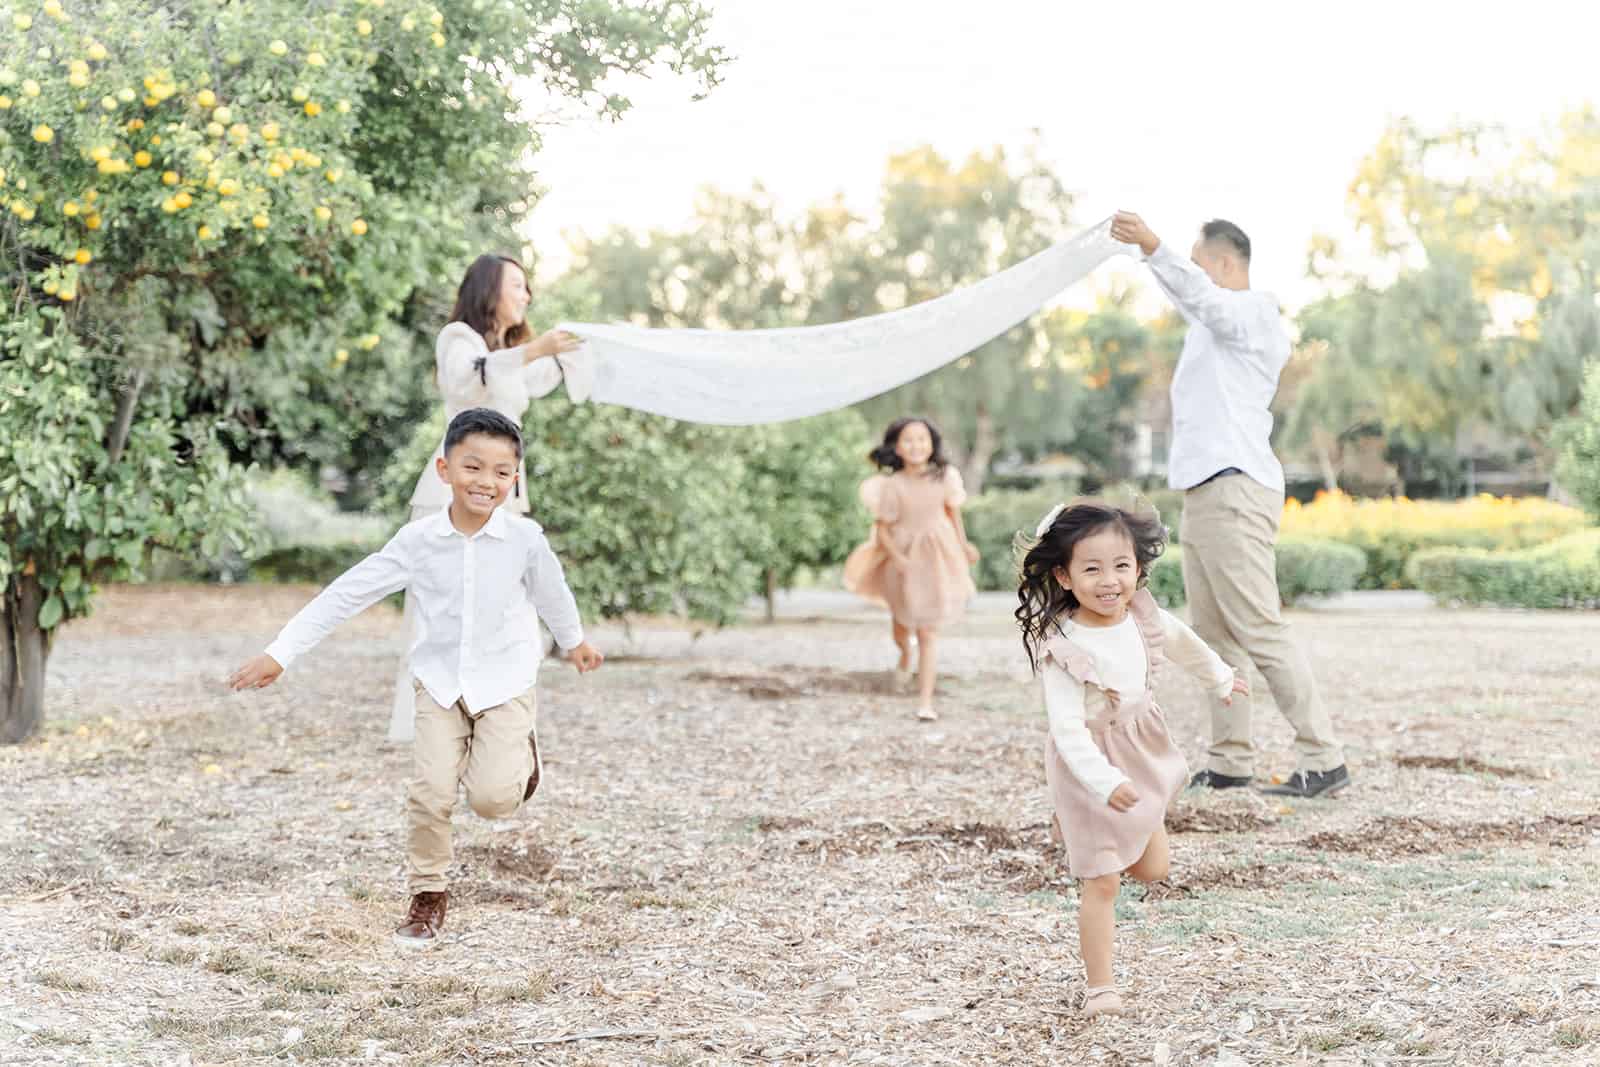 Mom and dad lift a blanket as their three Irvine Chinese School student children run underneath it in a park by an orange tree